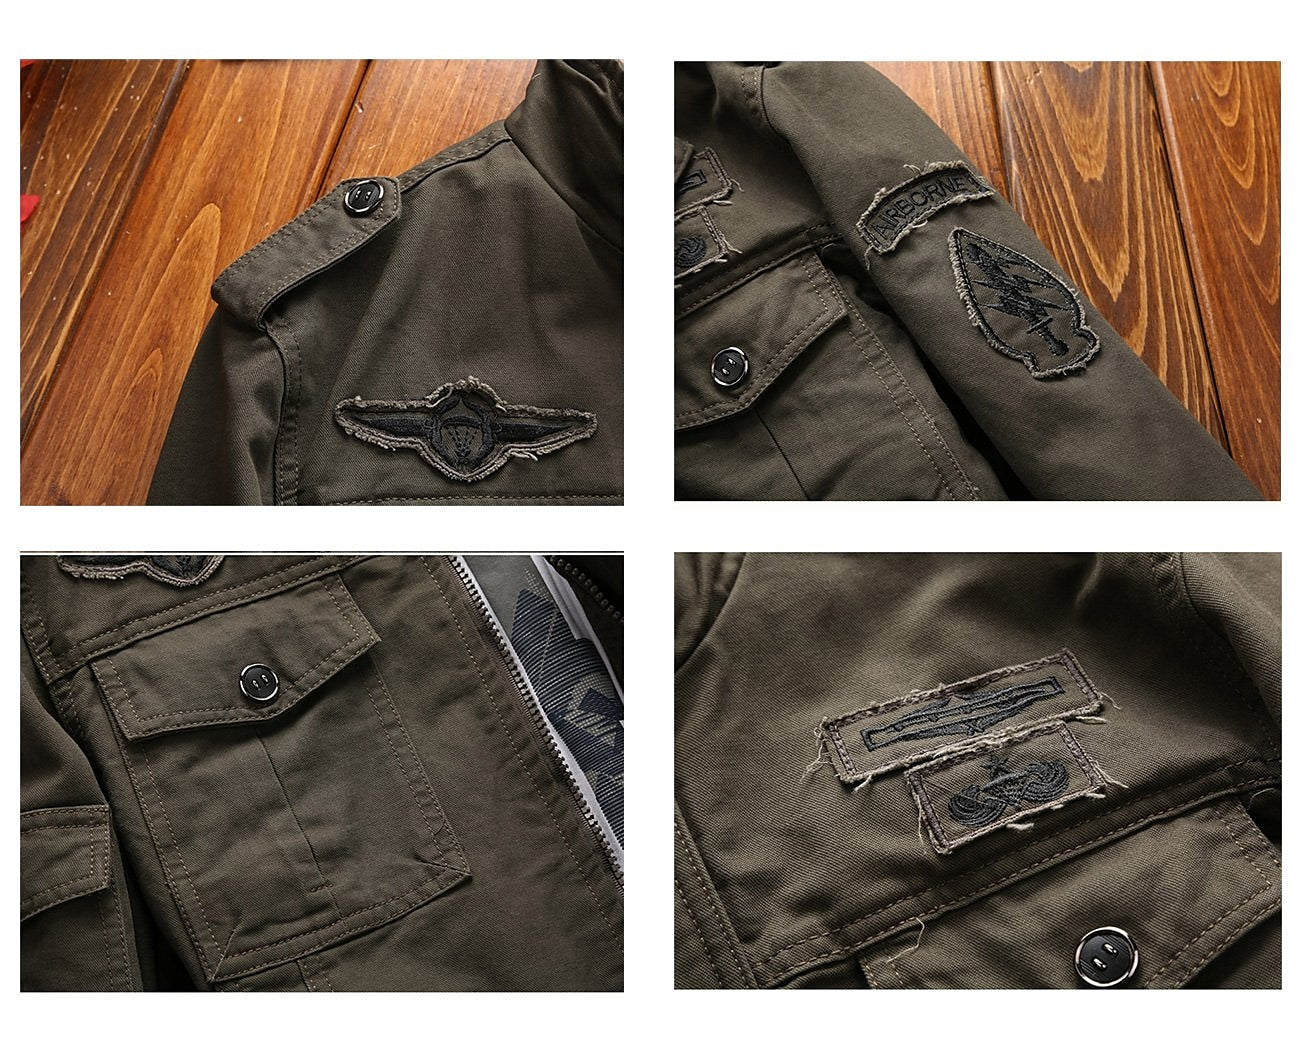 Men's Bomber Jacket Tactical Jacket Daily Weekend Winter Solid Colored Military Tactical Stand Collar Regular Cotton Black Army Green Khaki Jacket